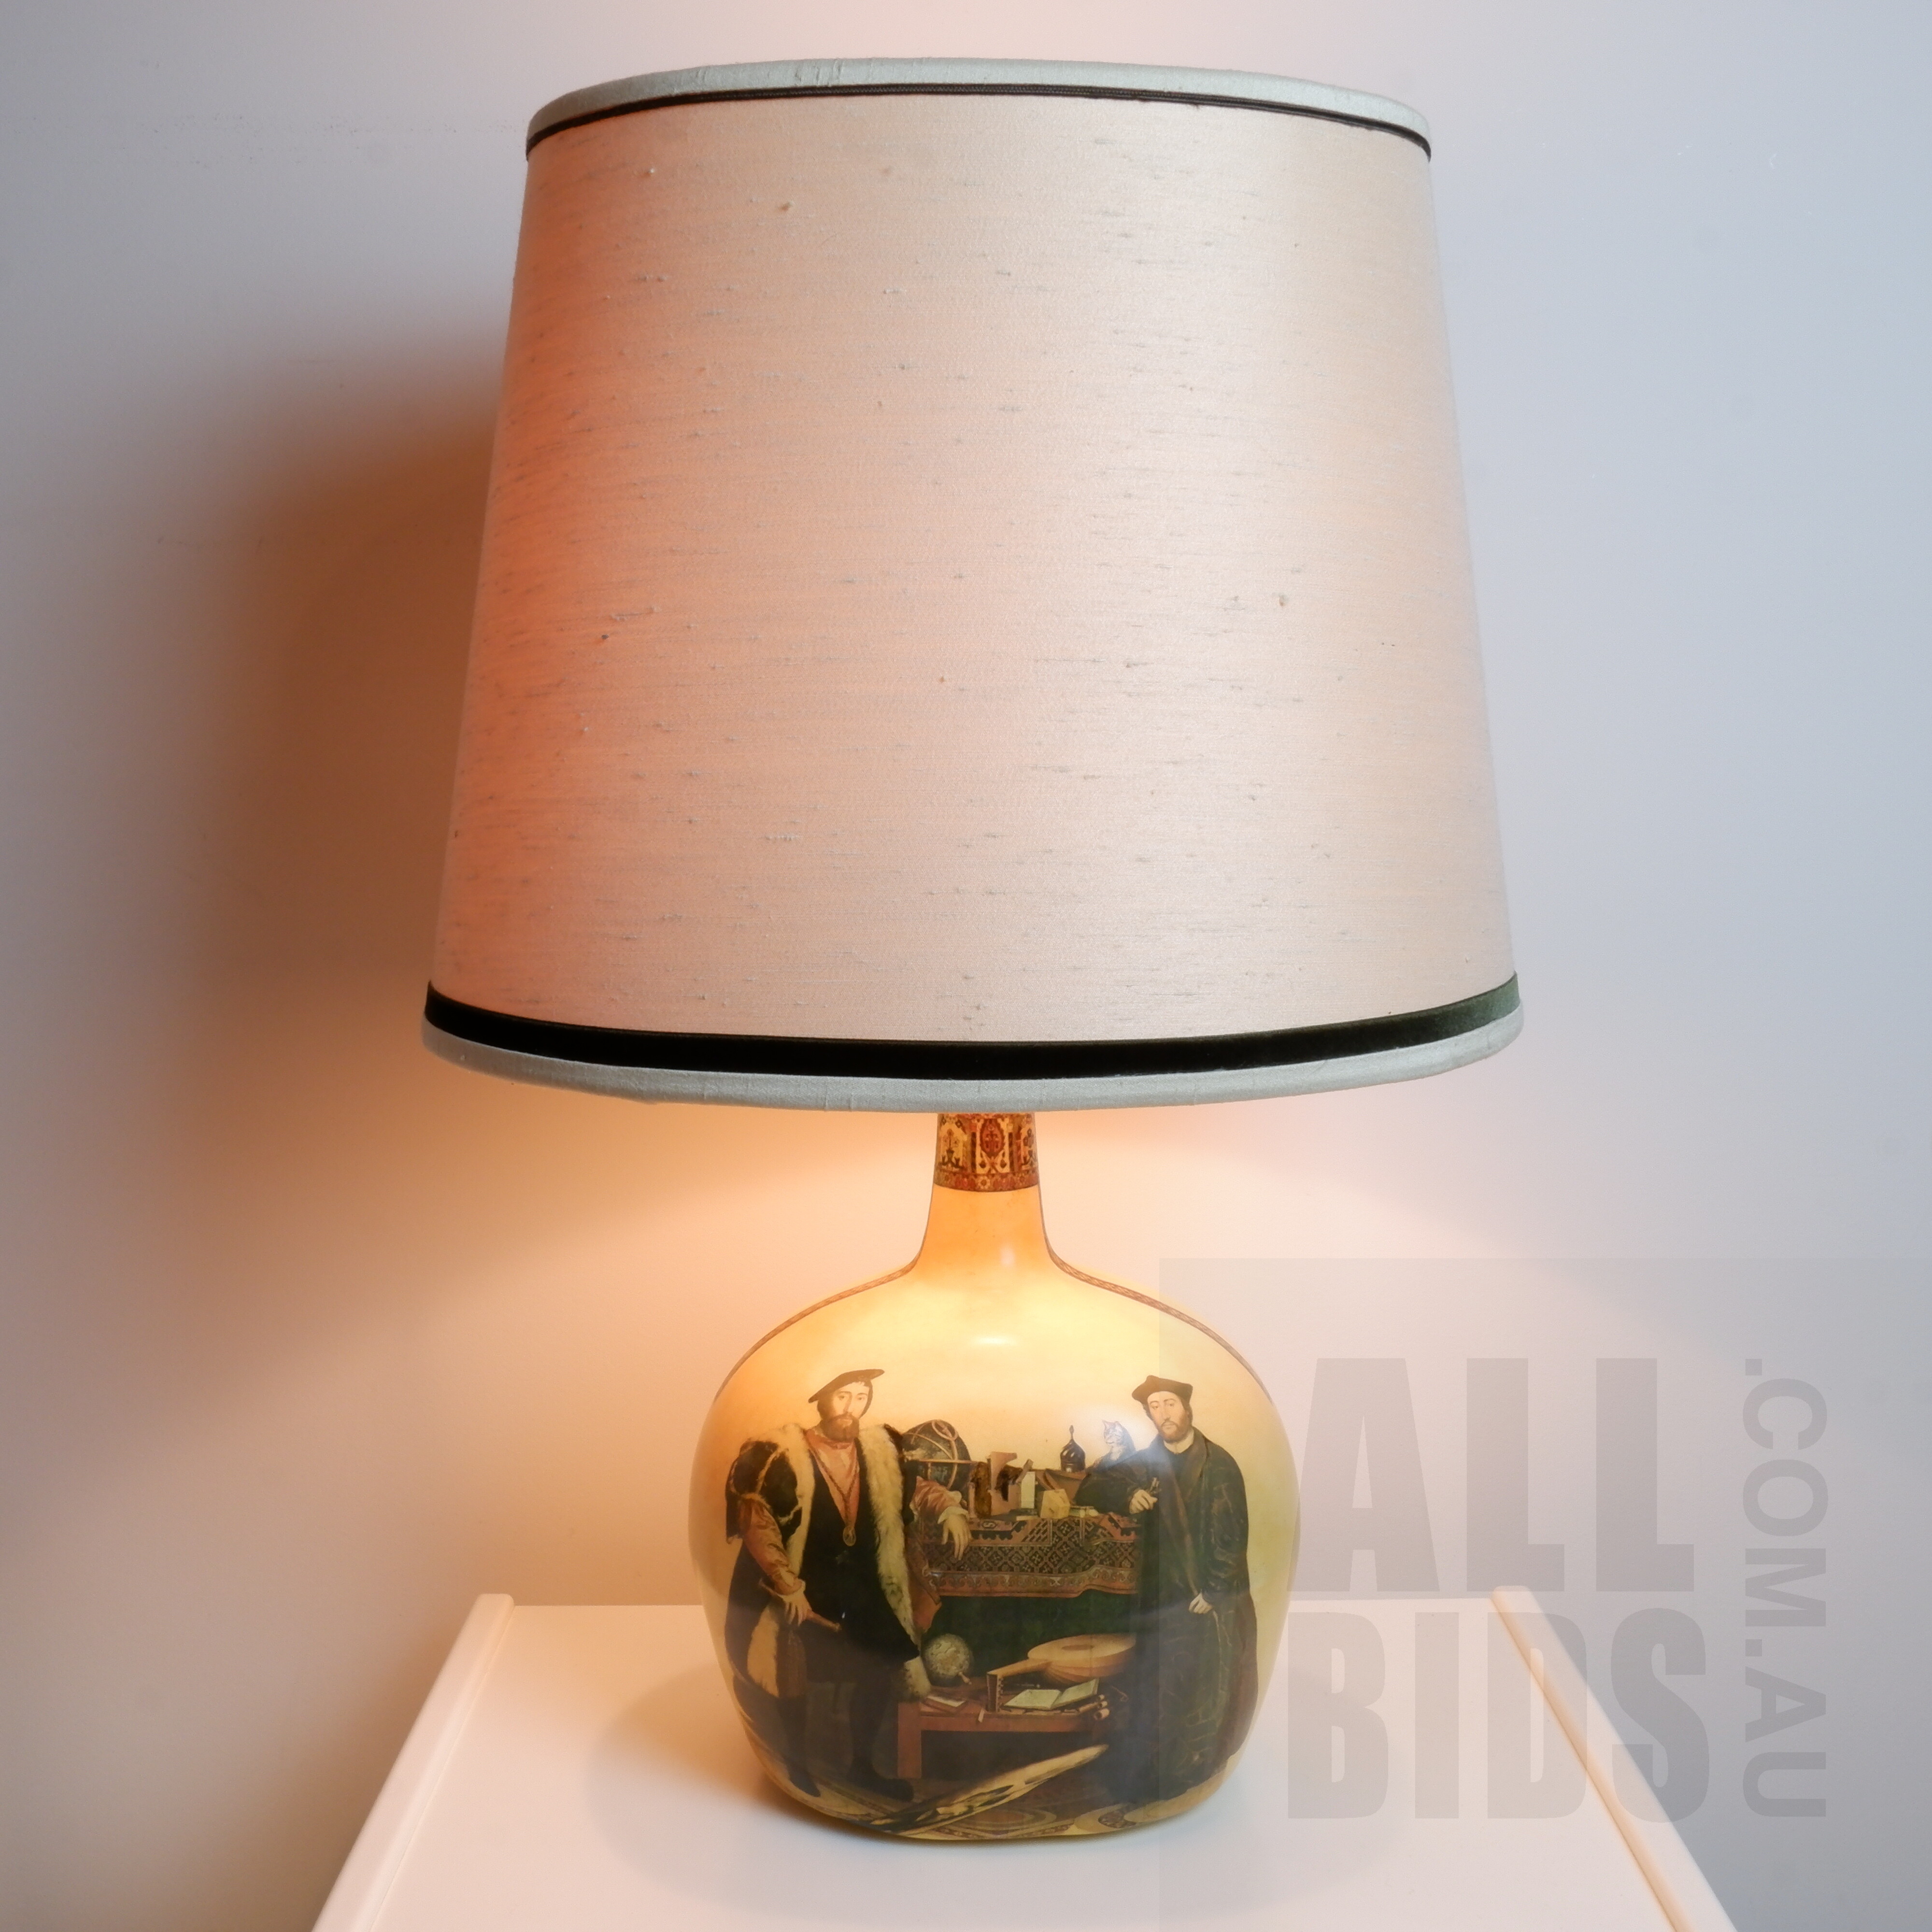 'Vintage Transfer Printed Ceramic Table Lamp with Linen Shade'